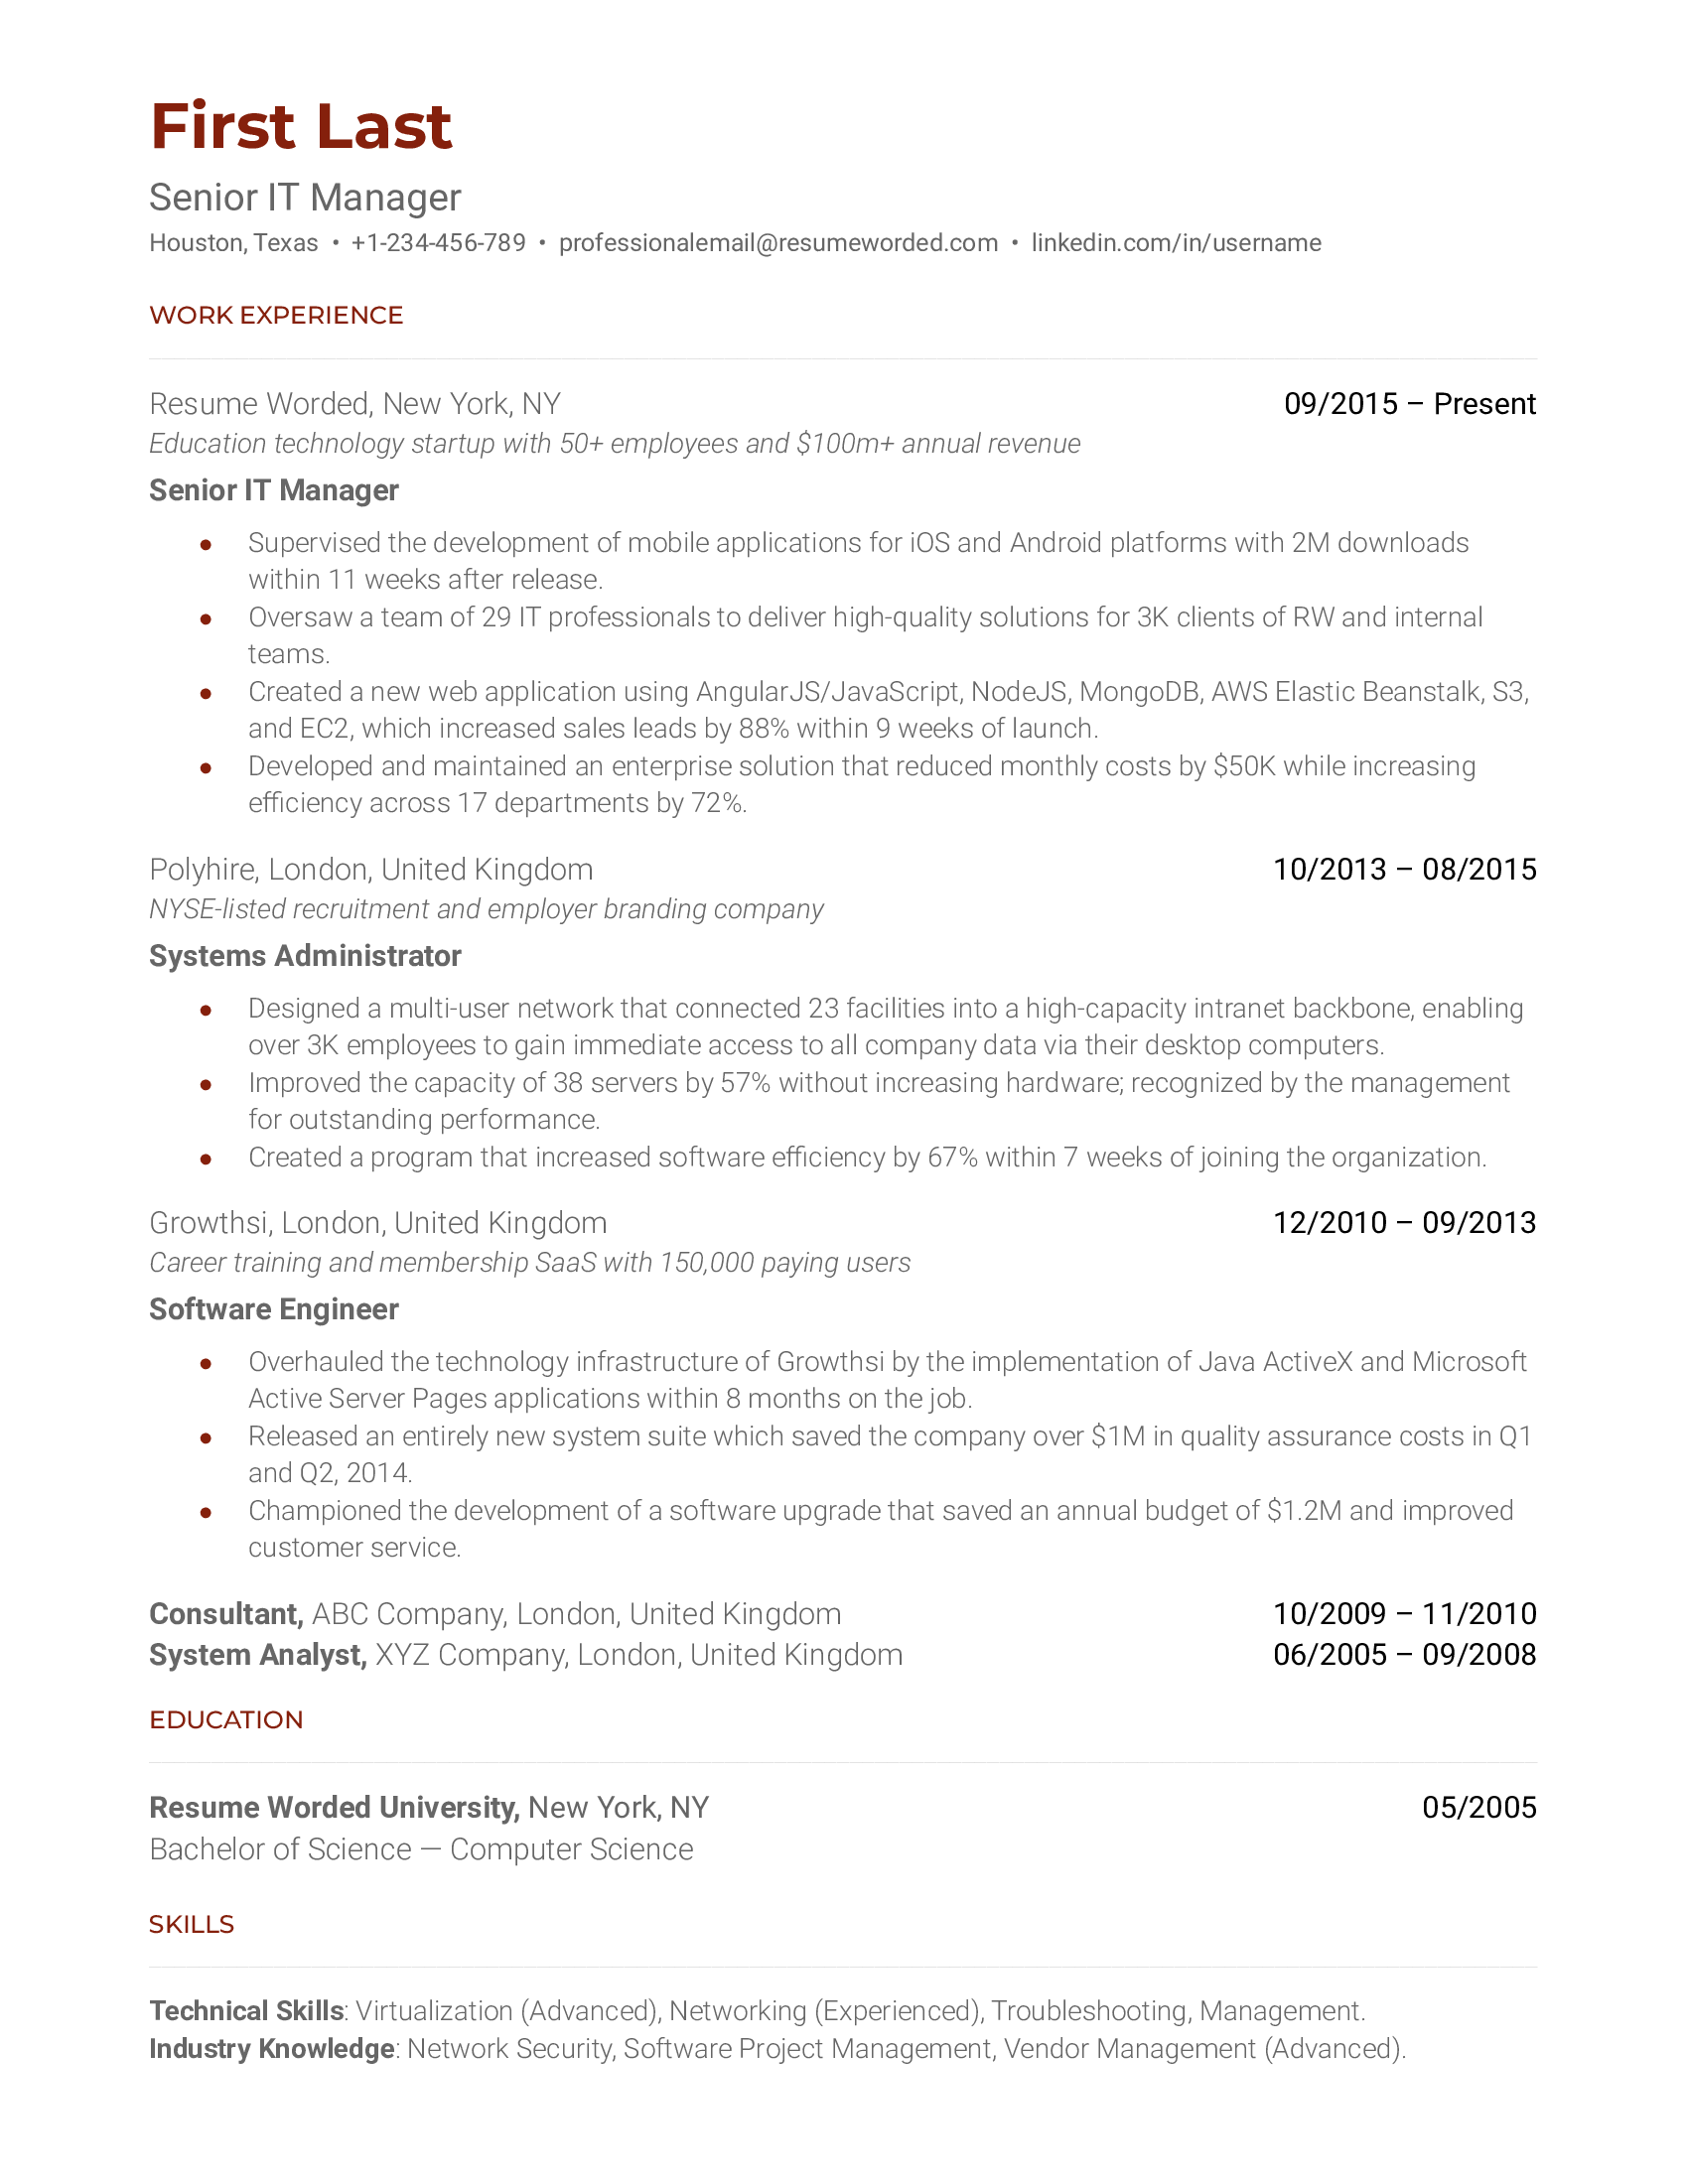 A well-structured CV for a Senior IT Manager role.